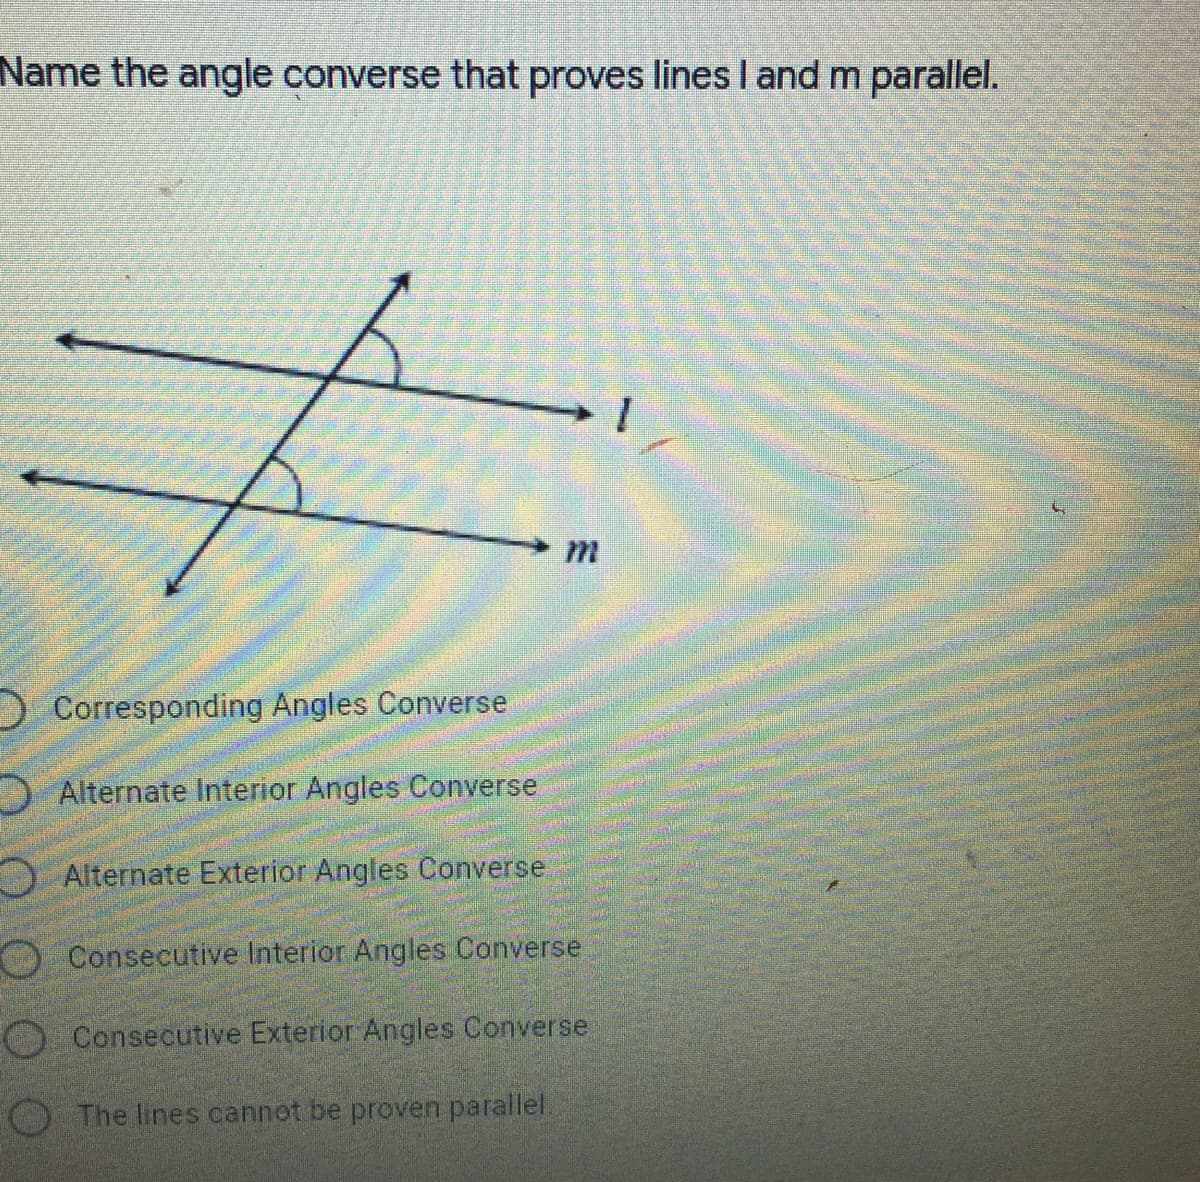 Name the angle converse that proves lines I and m parallel.
Corresponding Angles Converse
D Alternate Interior Angles Converse
A Alternate Exterior Angles Converse
O Consecutive Interior Angles Converse
O Consecutive Exterior Angles Converse
O The lines cannot be proven parallel.
